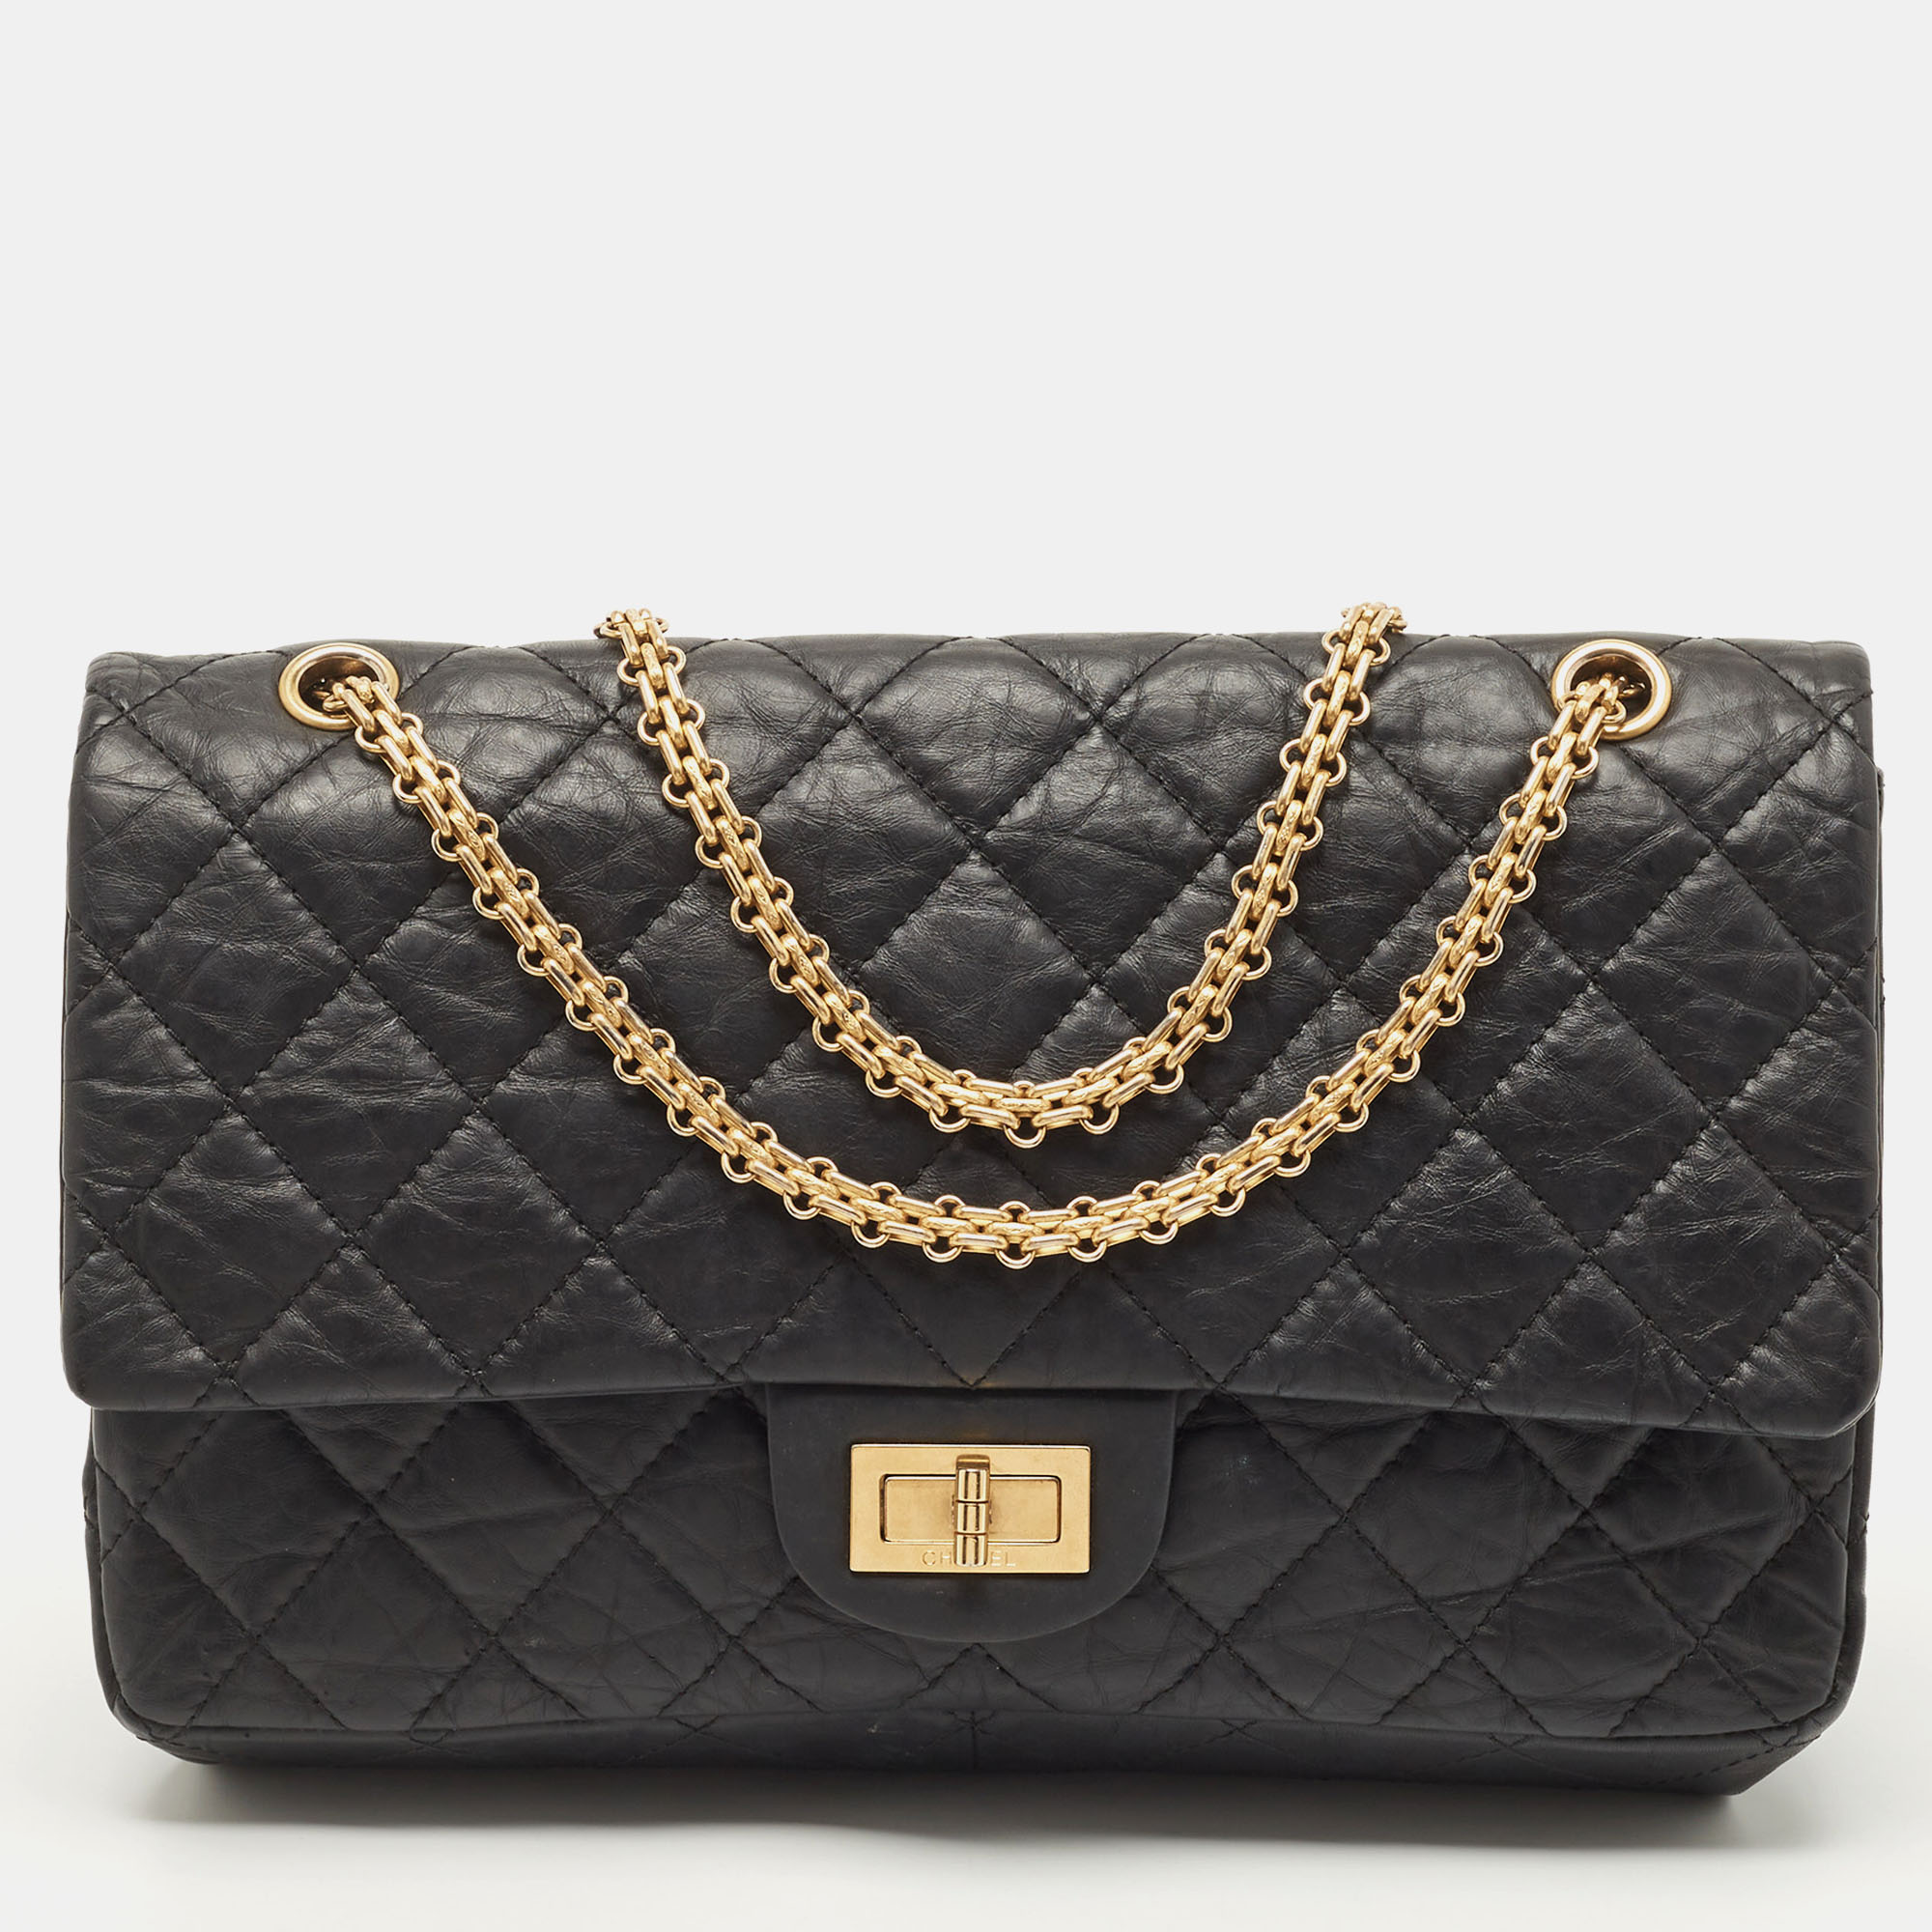 Chanel Black Quilted Aged Leather 227 Reissue 2.55 Flap Bag